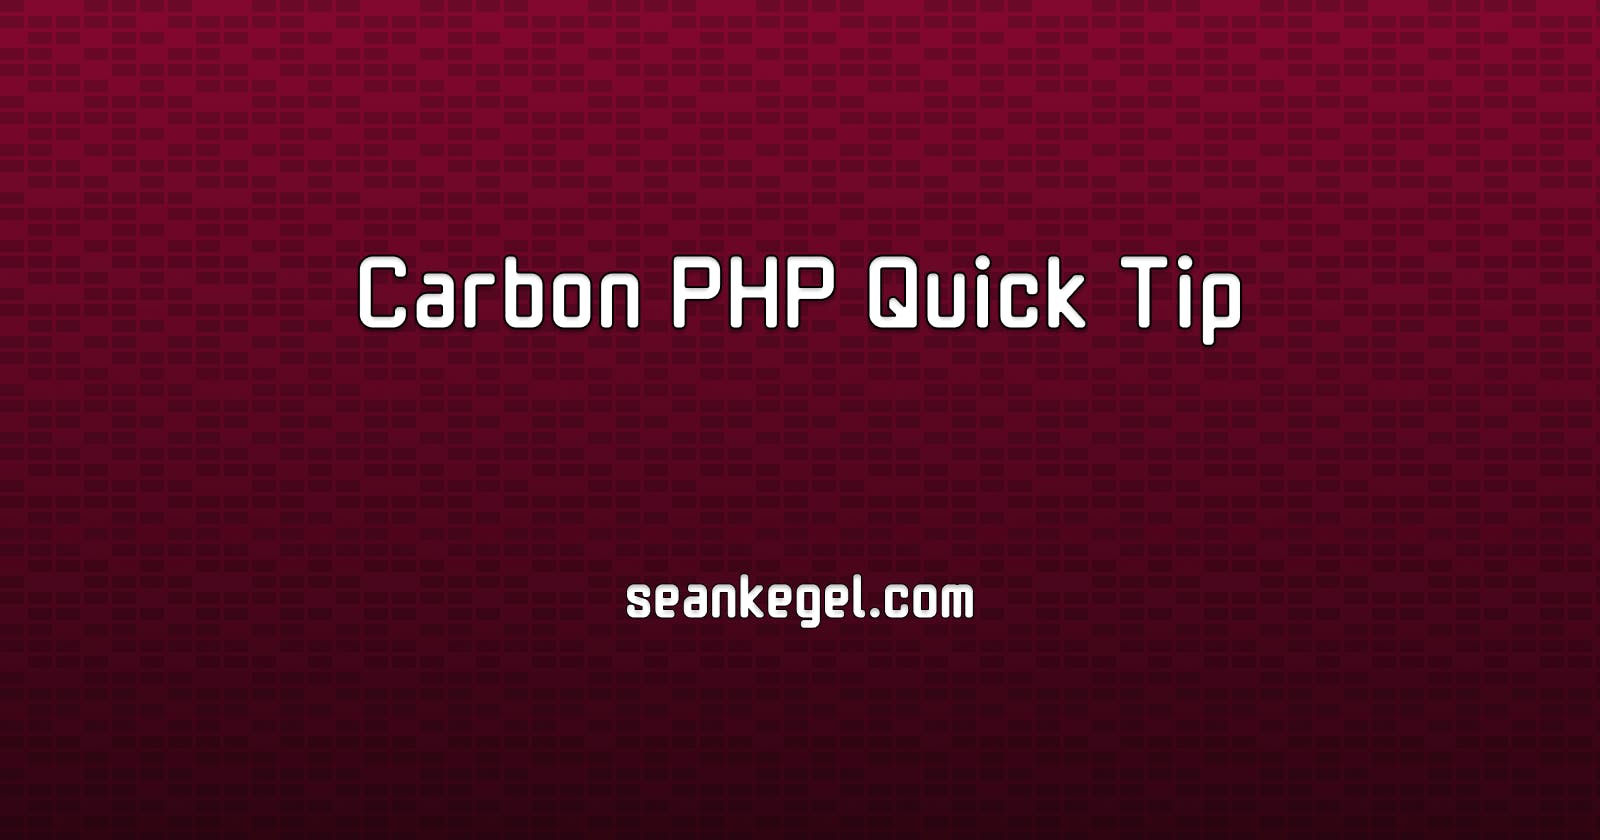 Carbon PHP Quick Tip